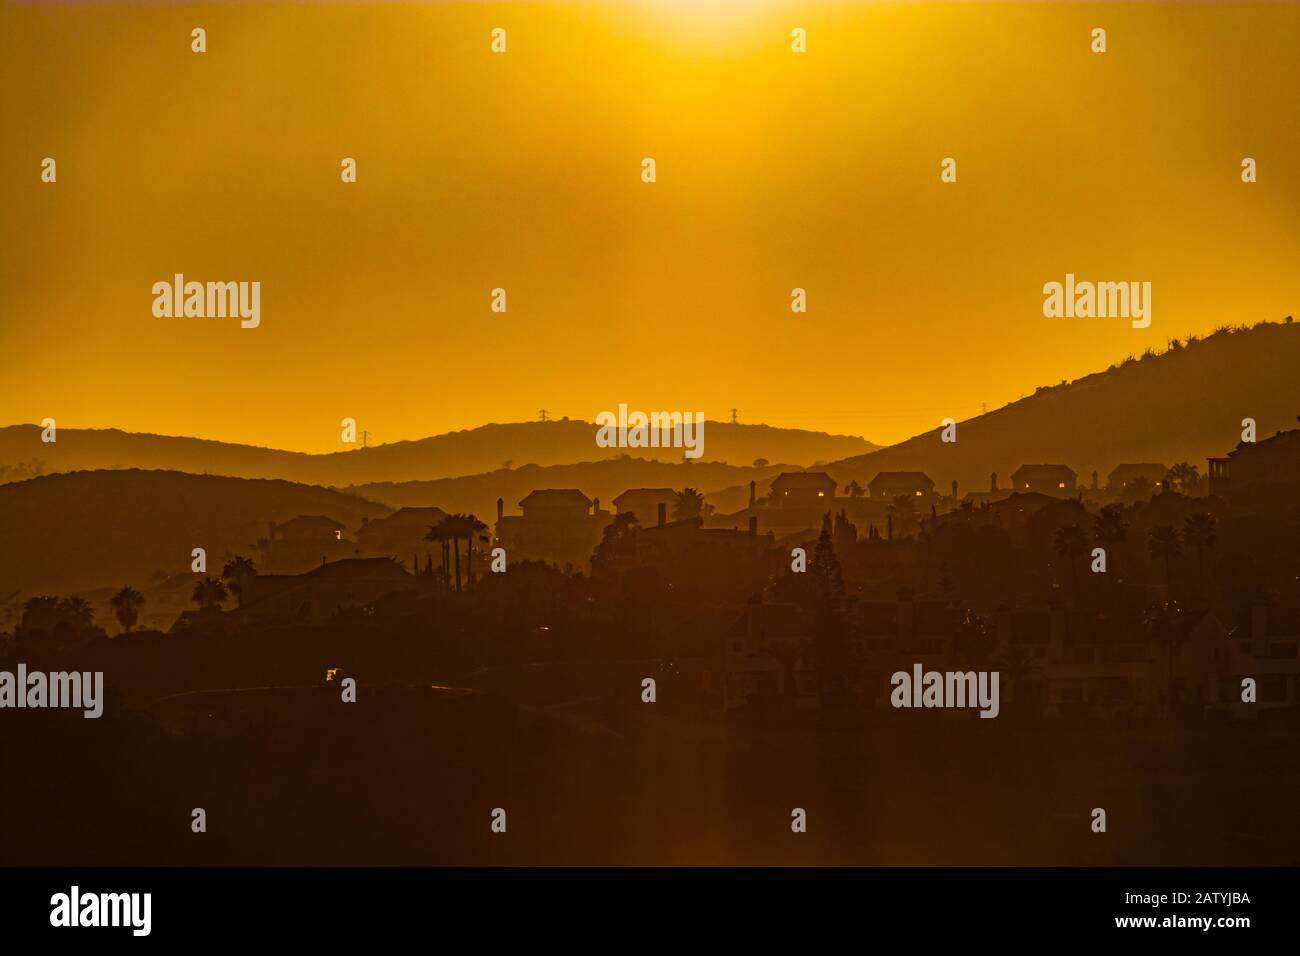 Orange sunset and andalusian hills with La Alcaidesa village seen in the background Stock Photo